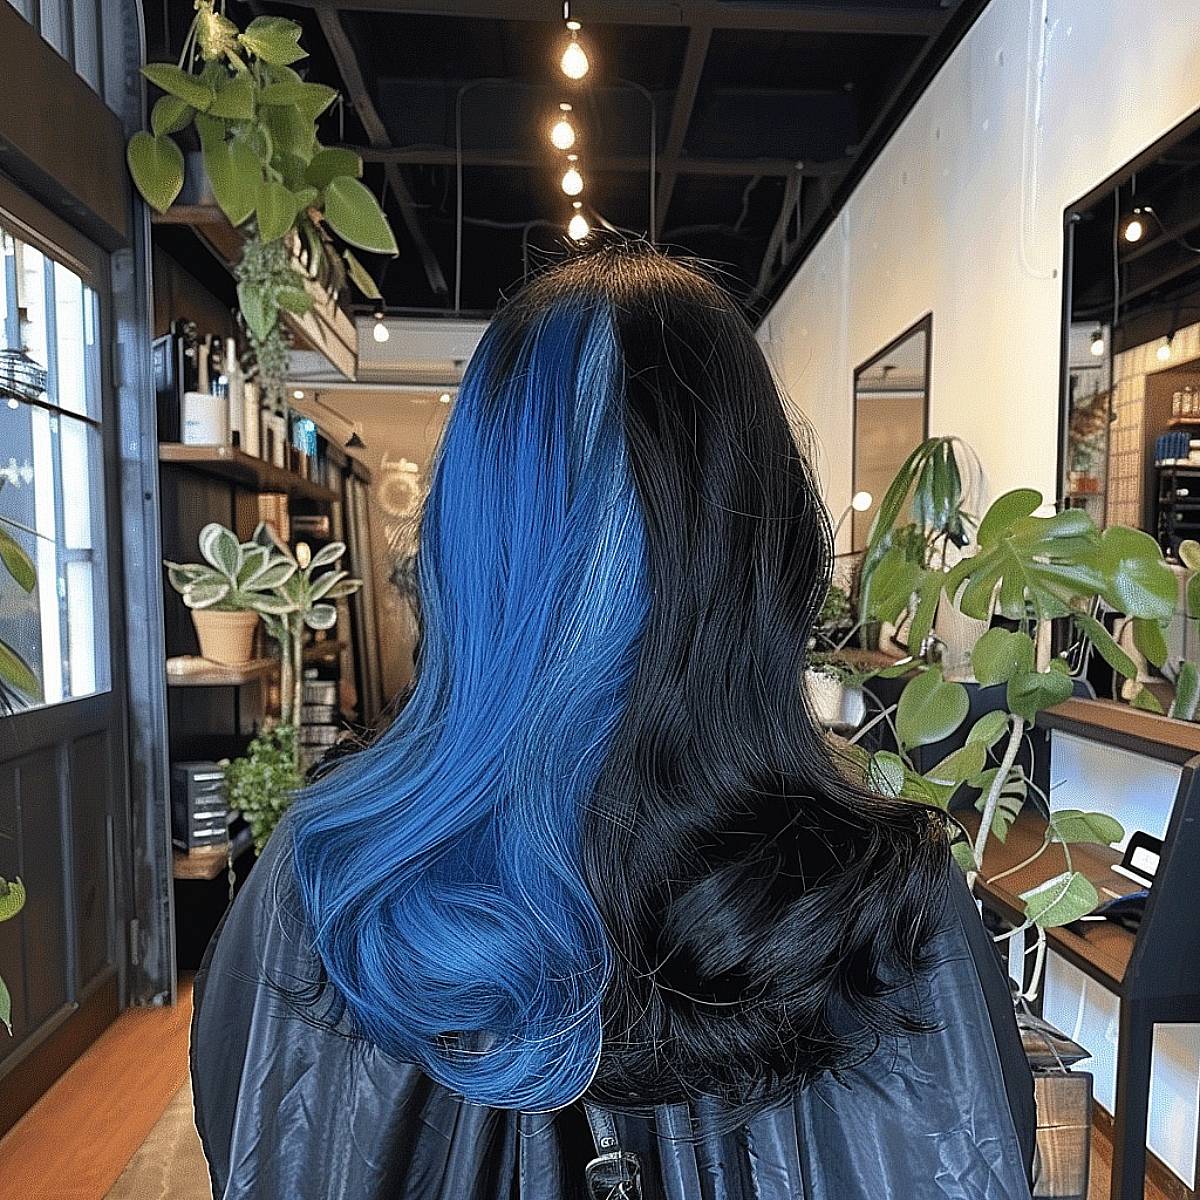 Long black hair transitioning into a deep blue, evoking the mysterious beauty of the night sky.